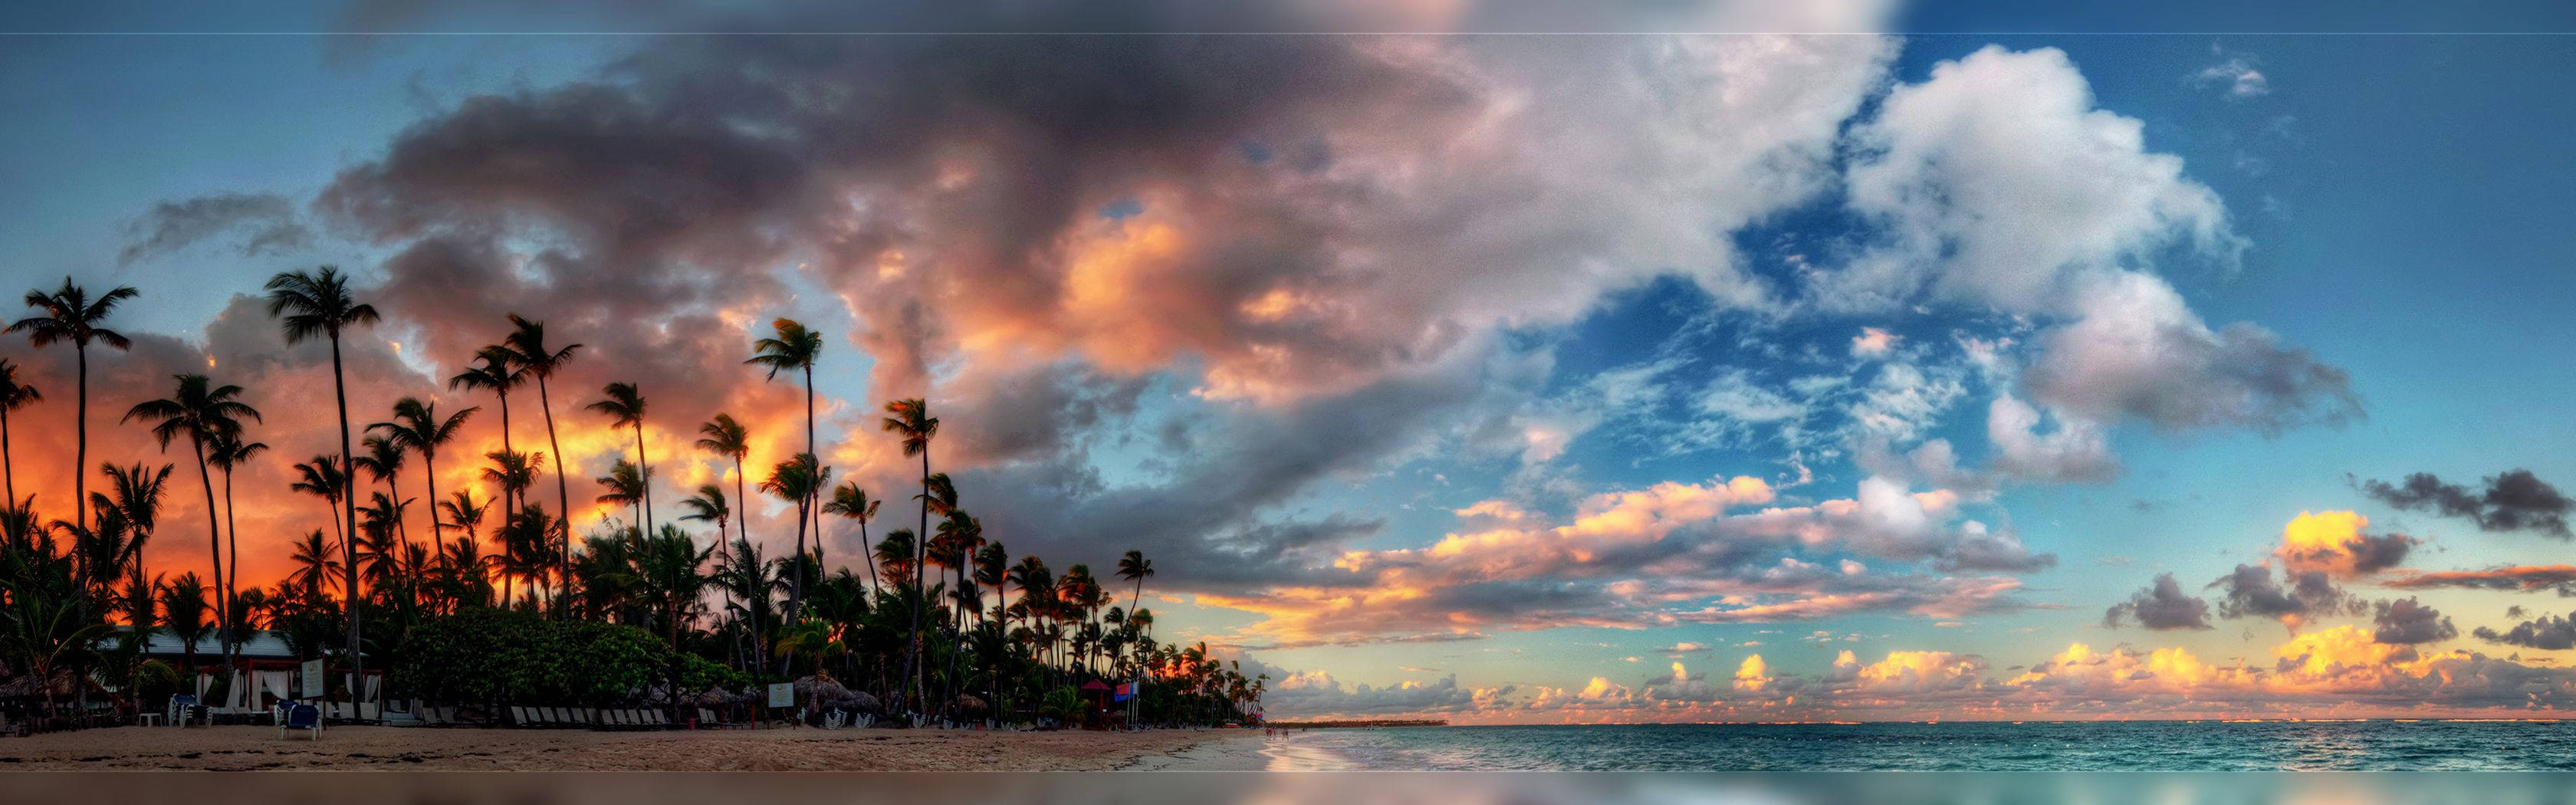 Enjoy the rhythm of nature and take in the view of the rosy sky and lush, tropical beach. Wallpaper